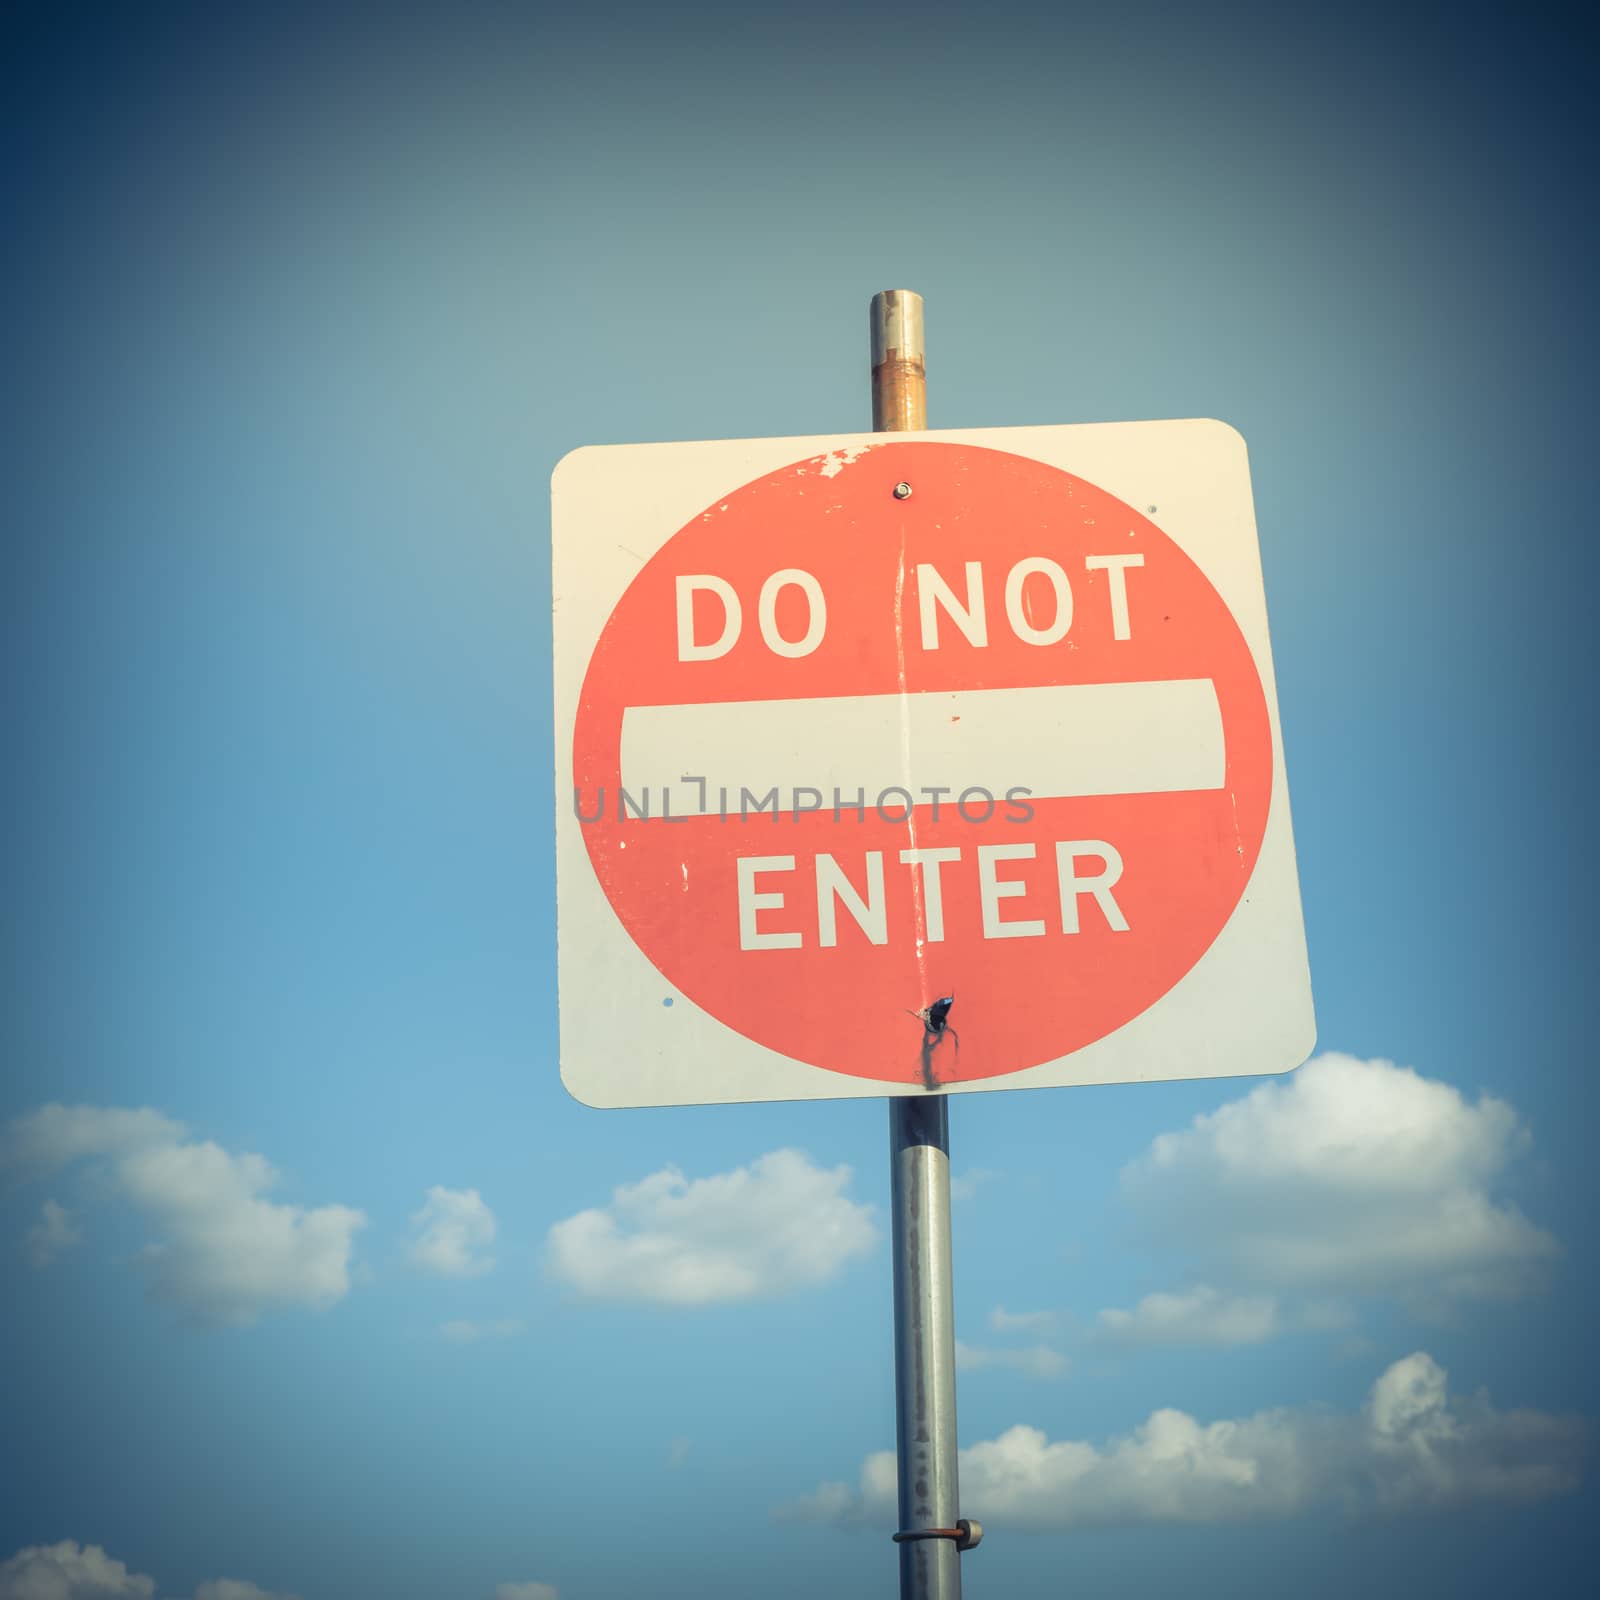 Filtered image close-up low angle view of do not enter sign under cloudy sky by trongnguyen